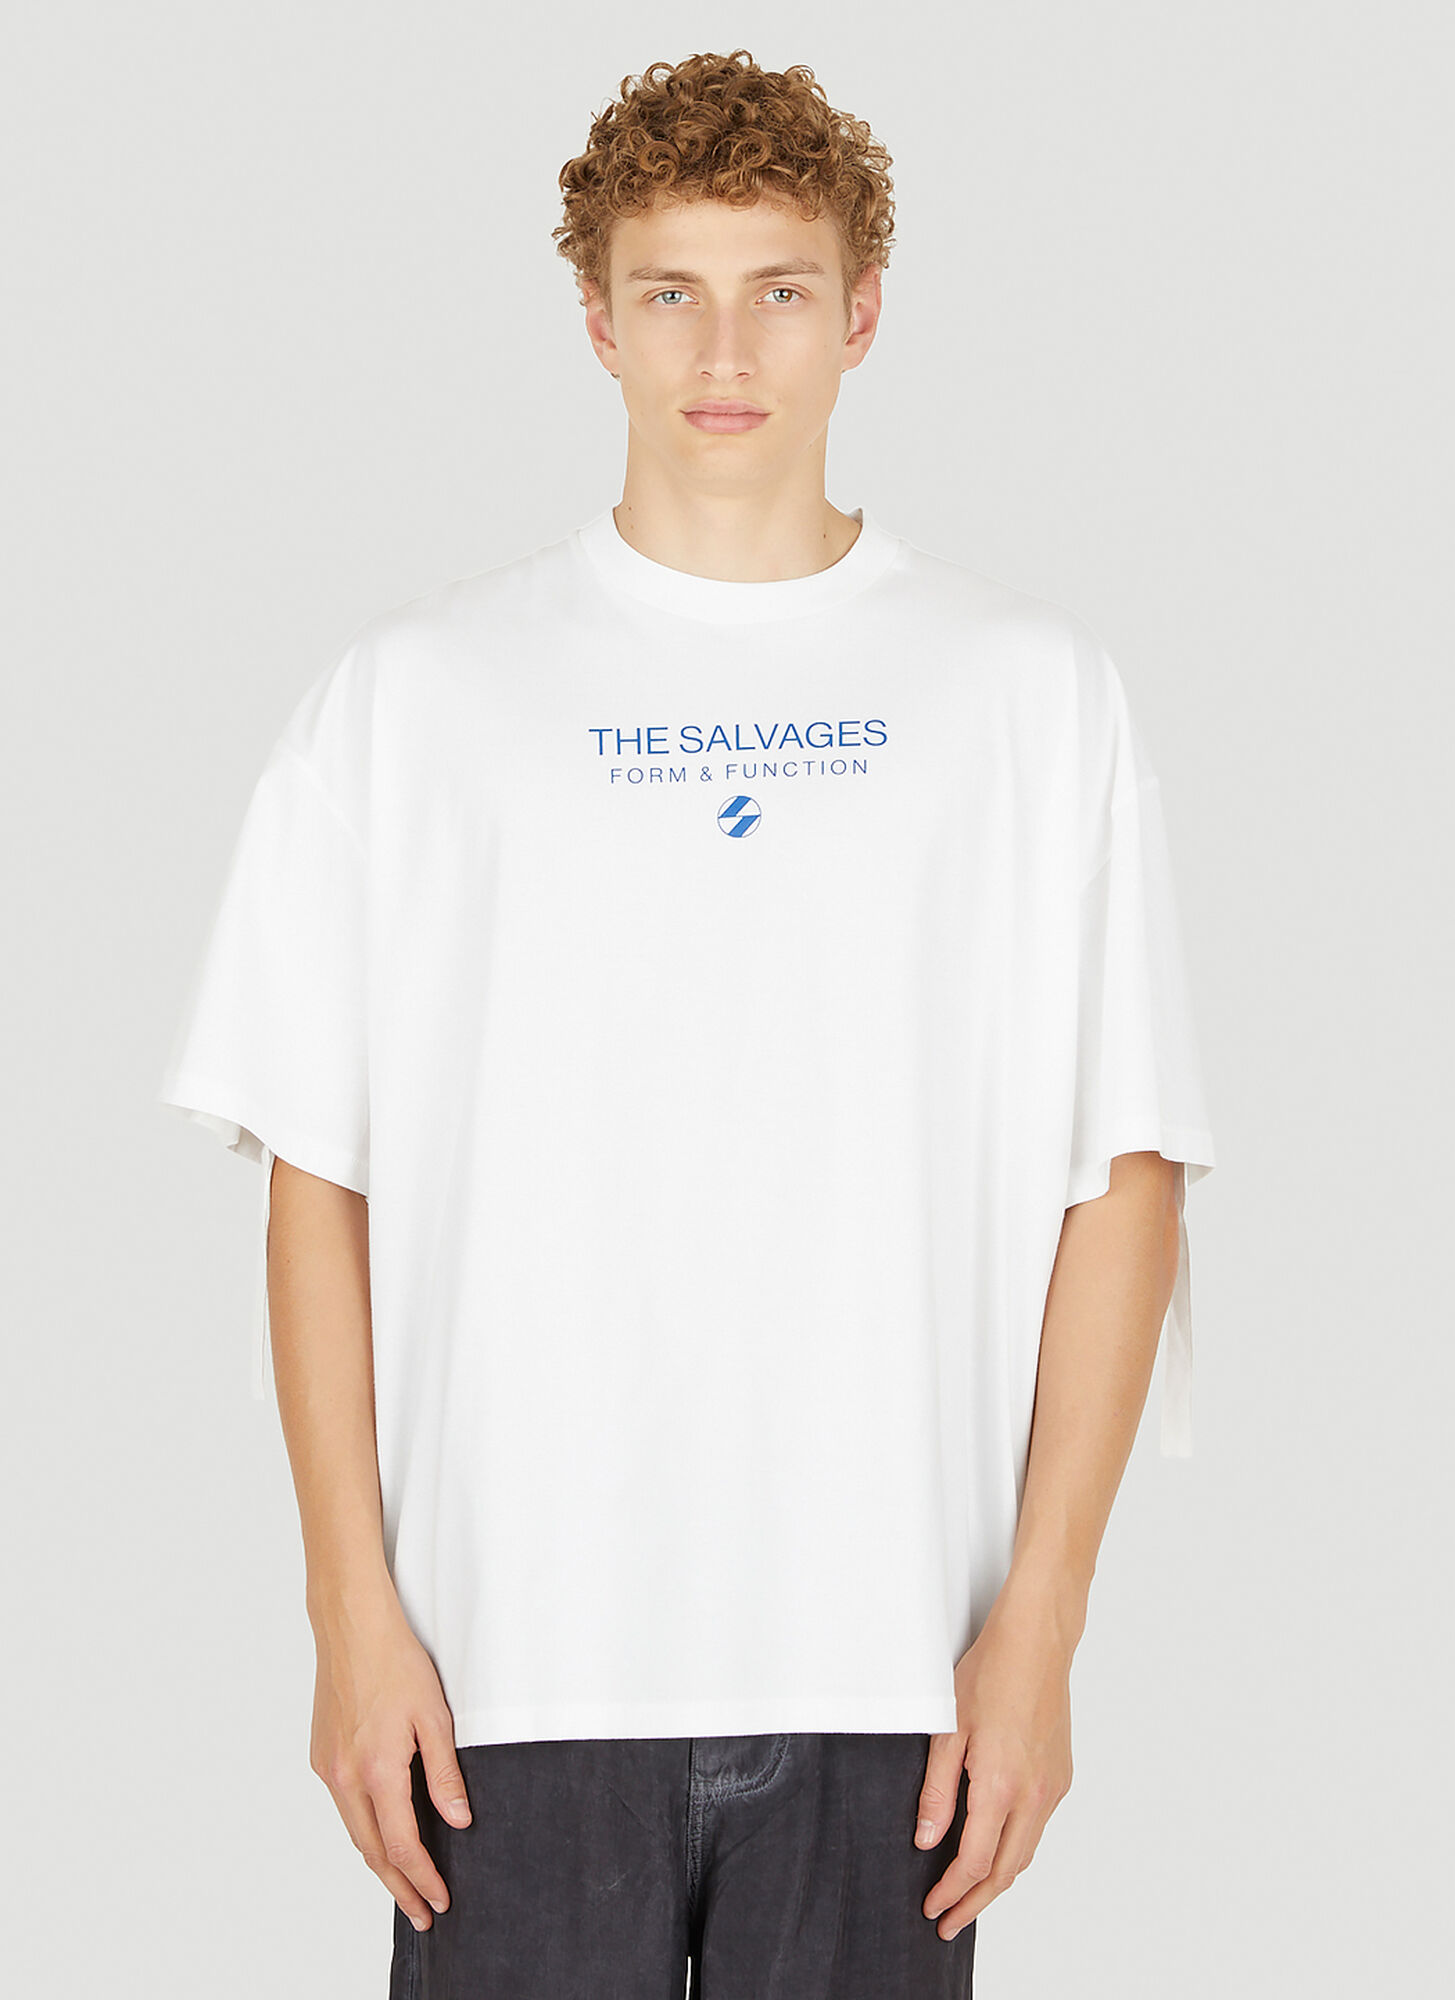 THE SALVAGES FORM & FUNCTION T-SHIRT